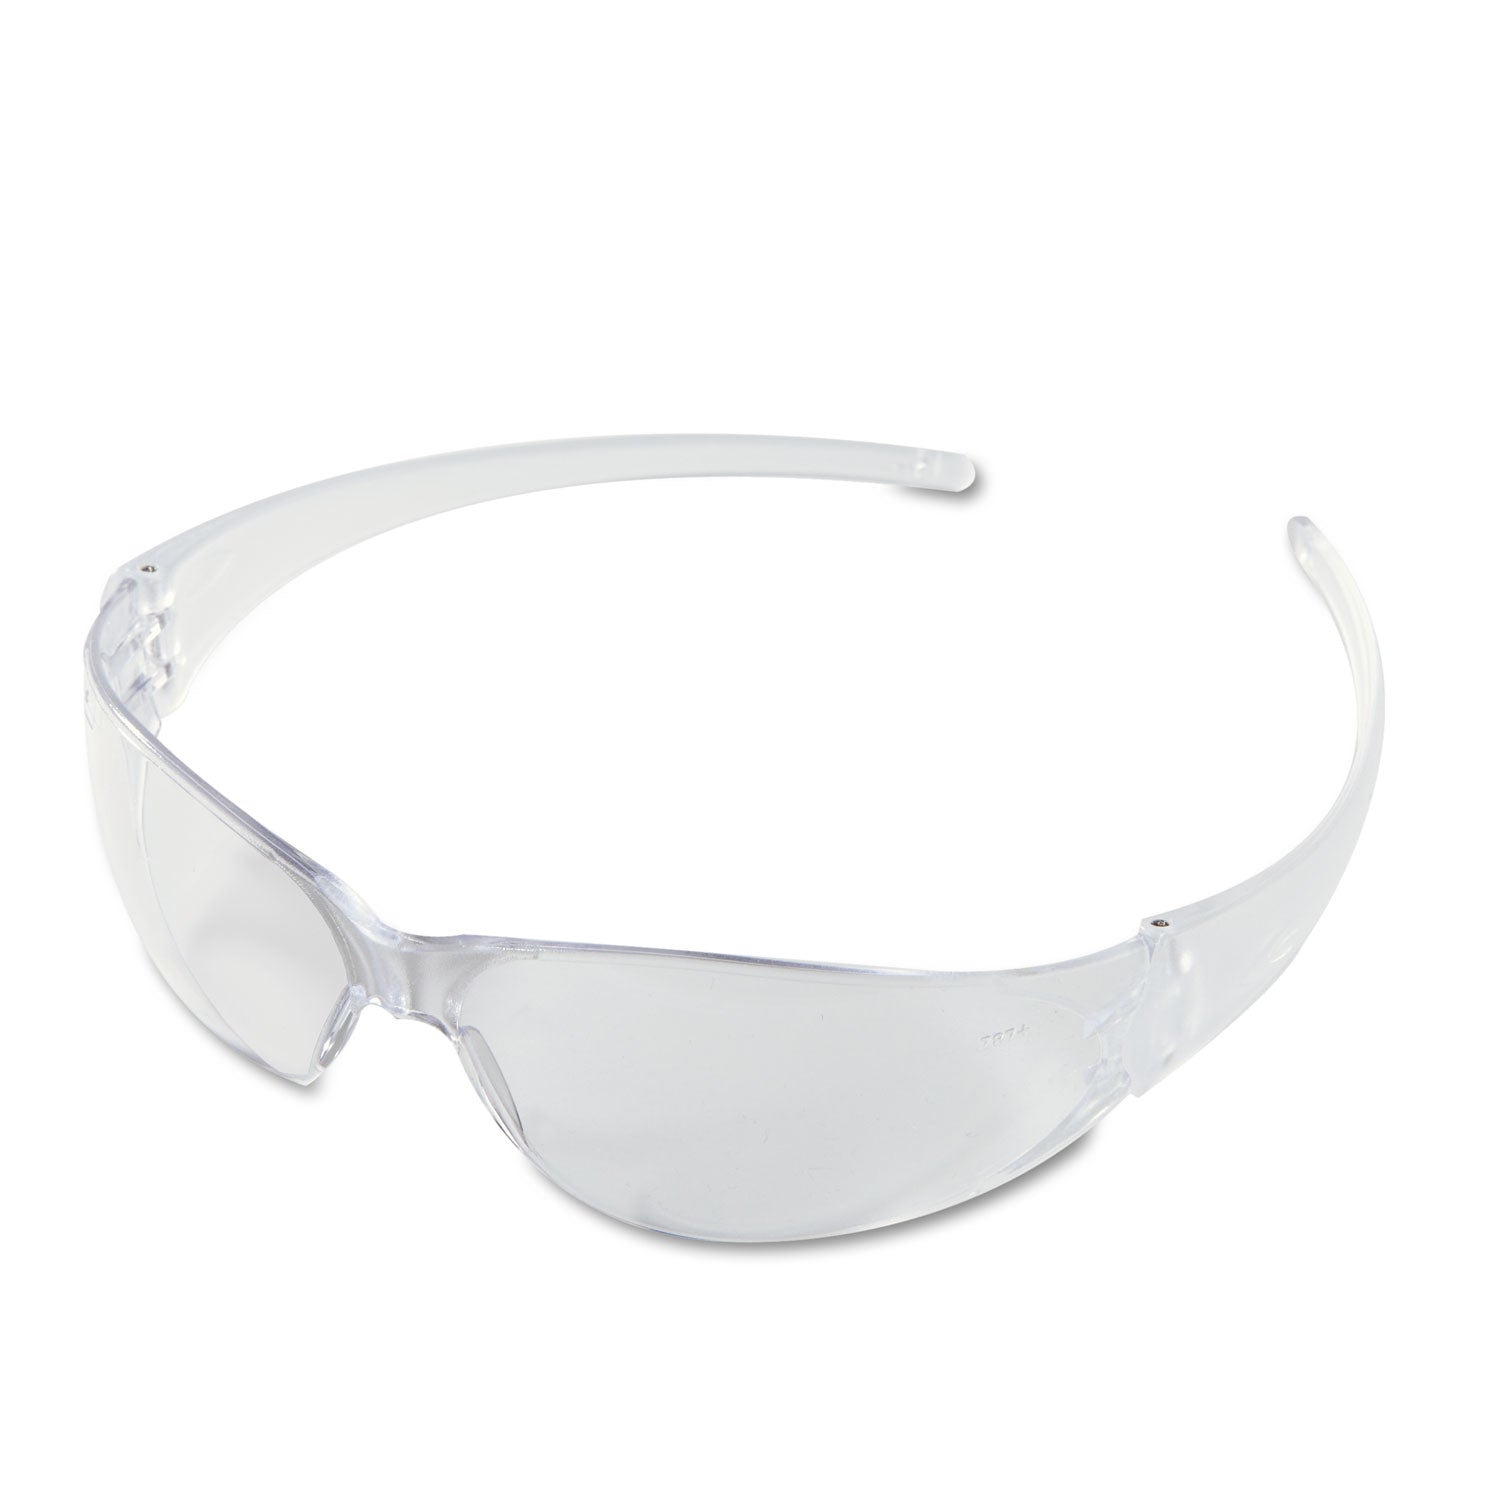 checkmate-wraparound-safety-glasses-clr-polycarbonate-frame-coated-clear-lens-12-box_crwck110bx - 1